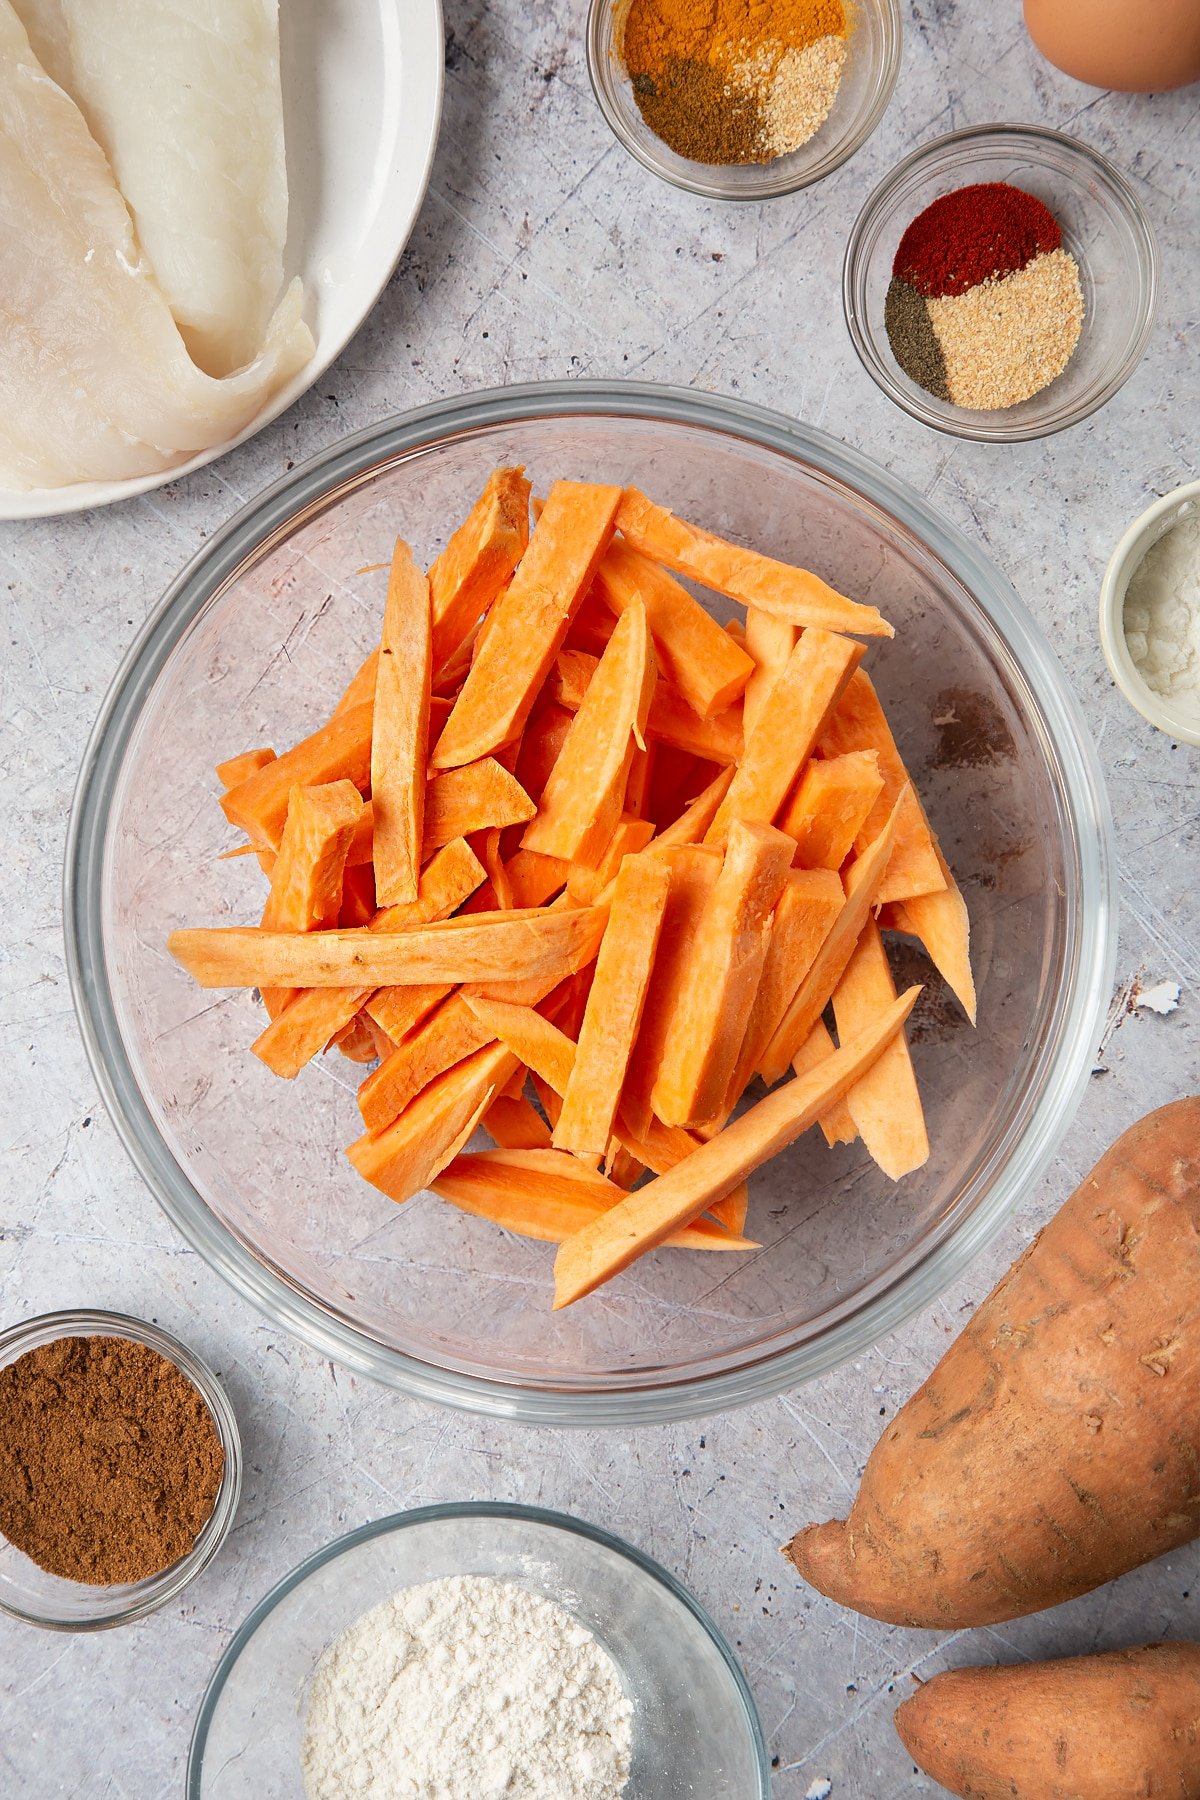 Sweet potato cut into fries and placed in a glass bowl. Surrounding the bowl is ingredients for sweet potato chips.